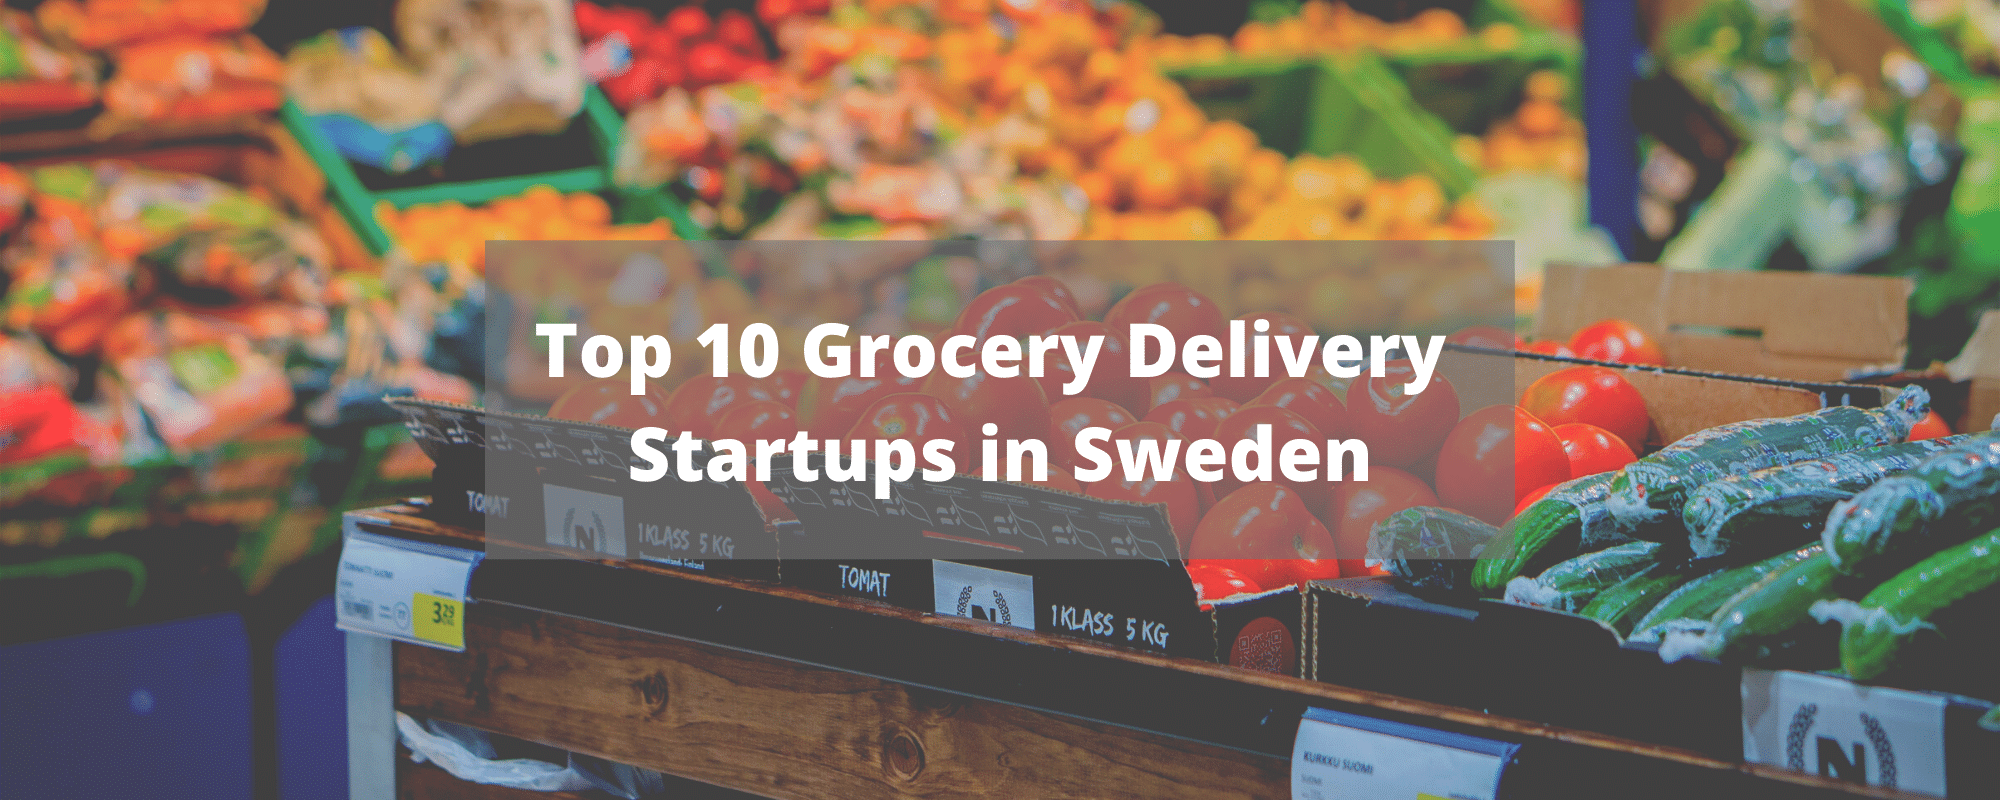 top 10 grocery delivery startups in sweden